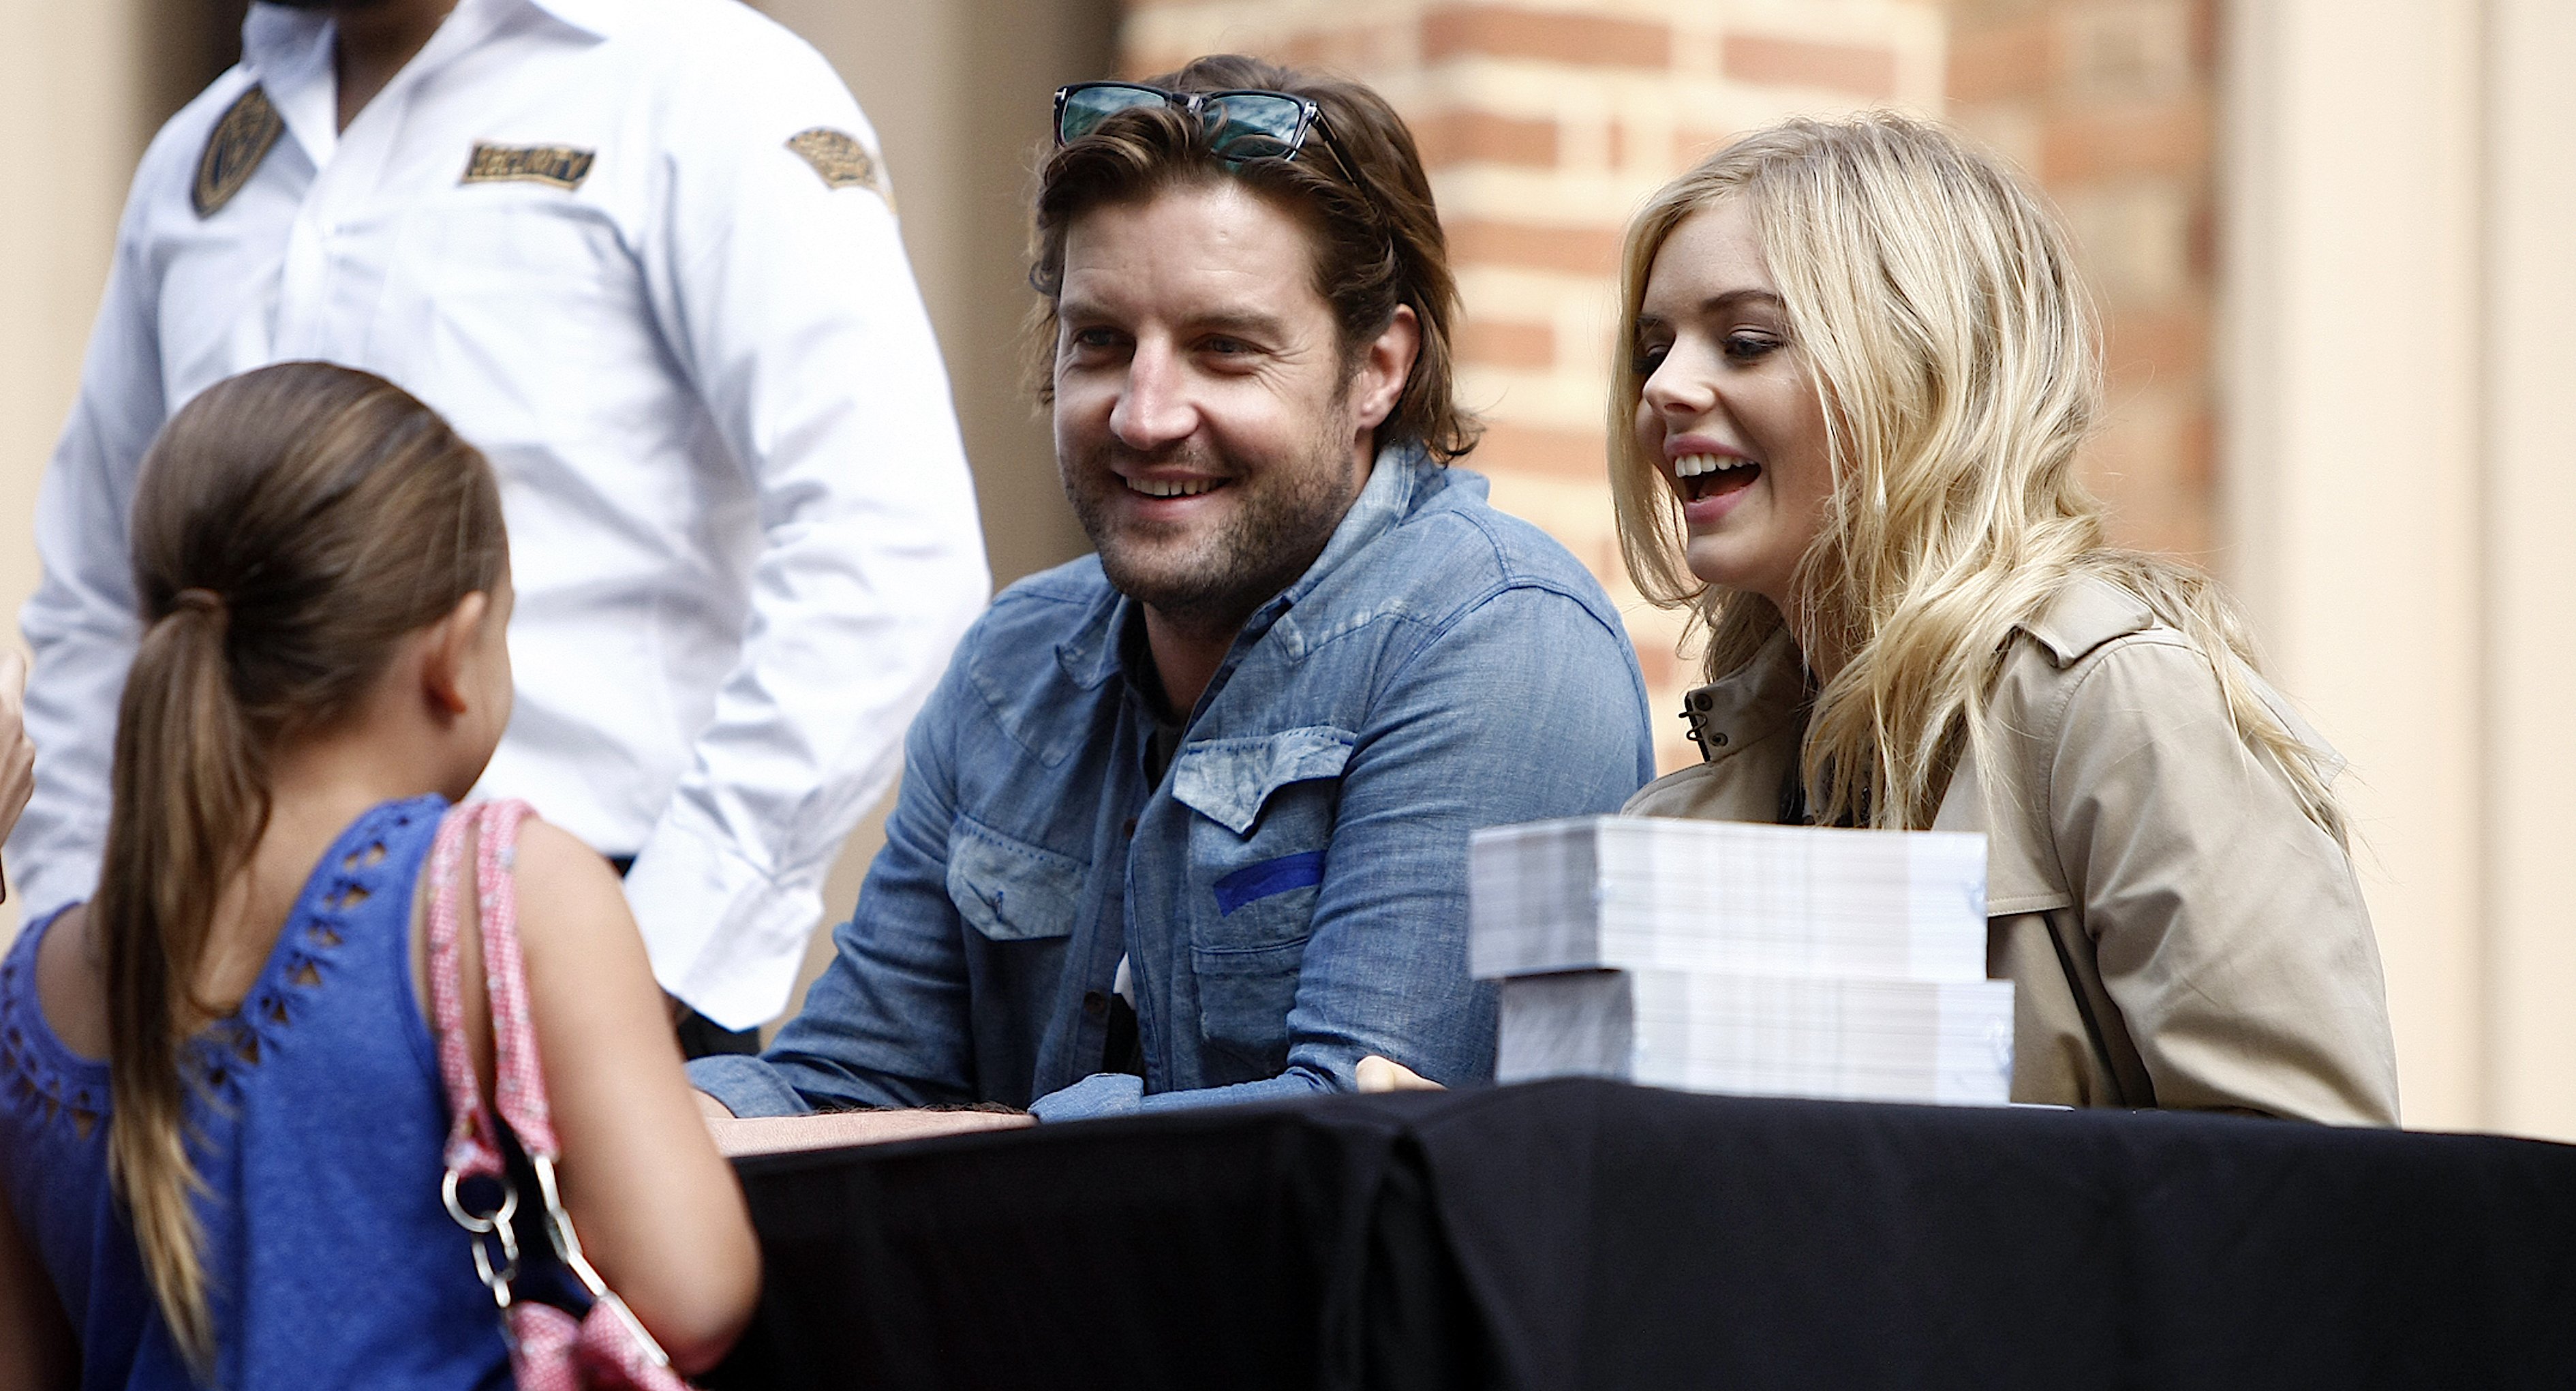 Axle Whitehead and Samara Weaving interacting with "Home and Away" fans at Wesley Quarter on April 21 2012 in Perth, Australia | Source: Getty Images